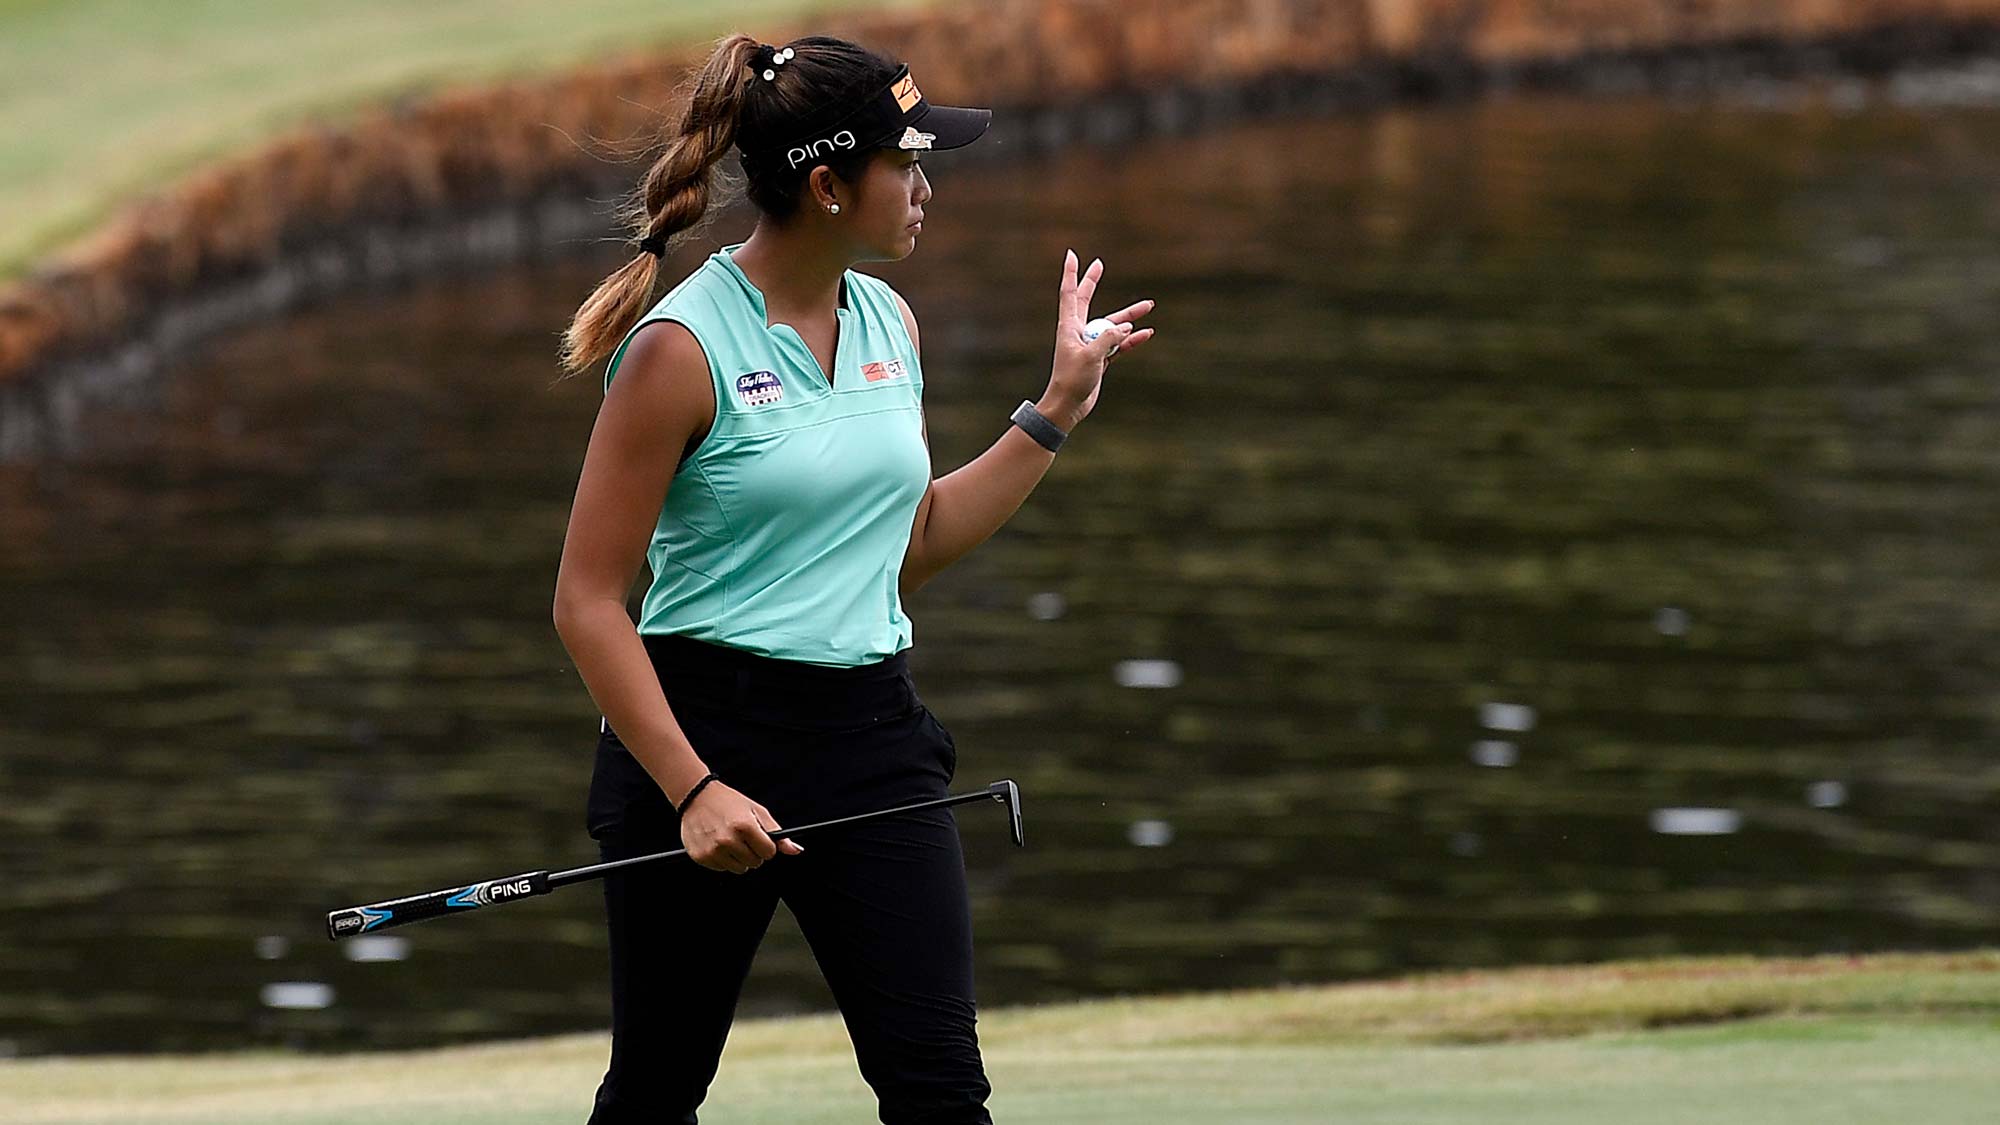 Bianca Pagdanganan waves to spectators as she walks off the 18th green during round three of the 2020 LPGA Drive On Championship - Reynolds Lake Oconee